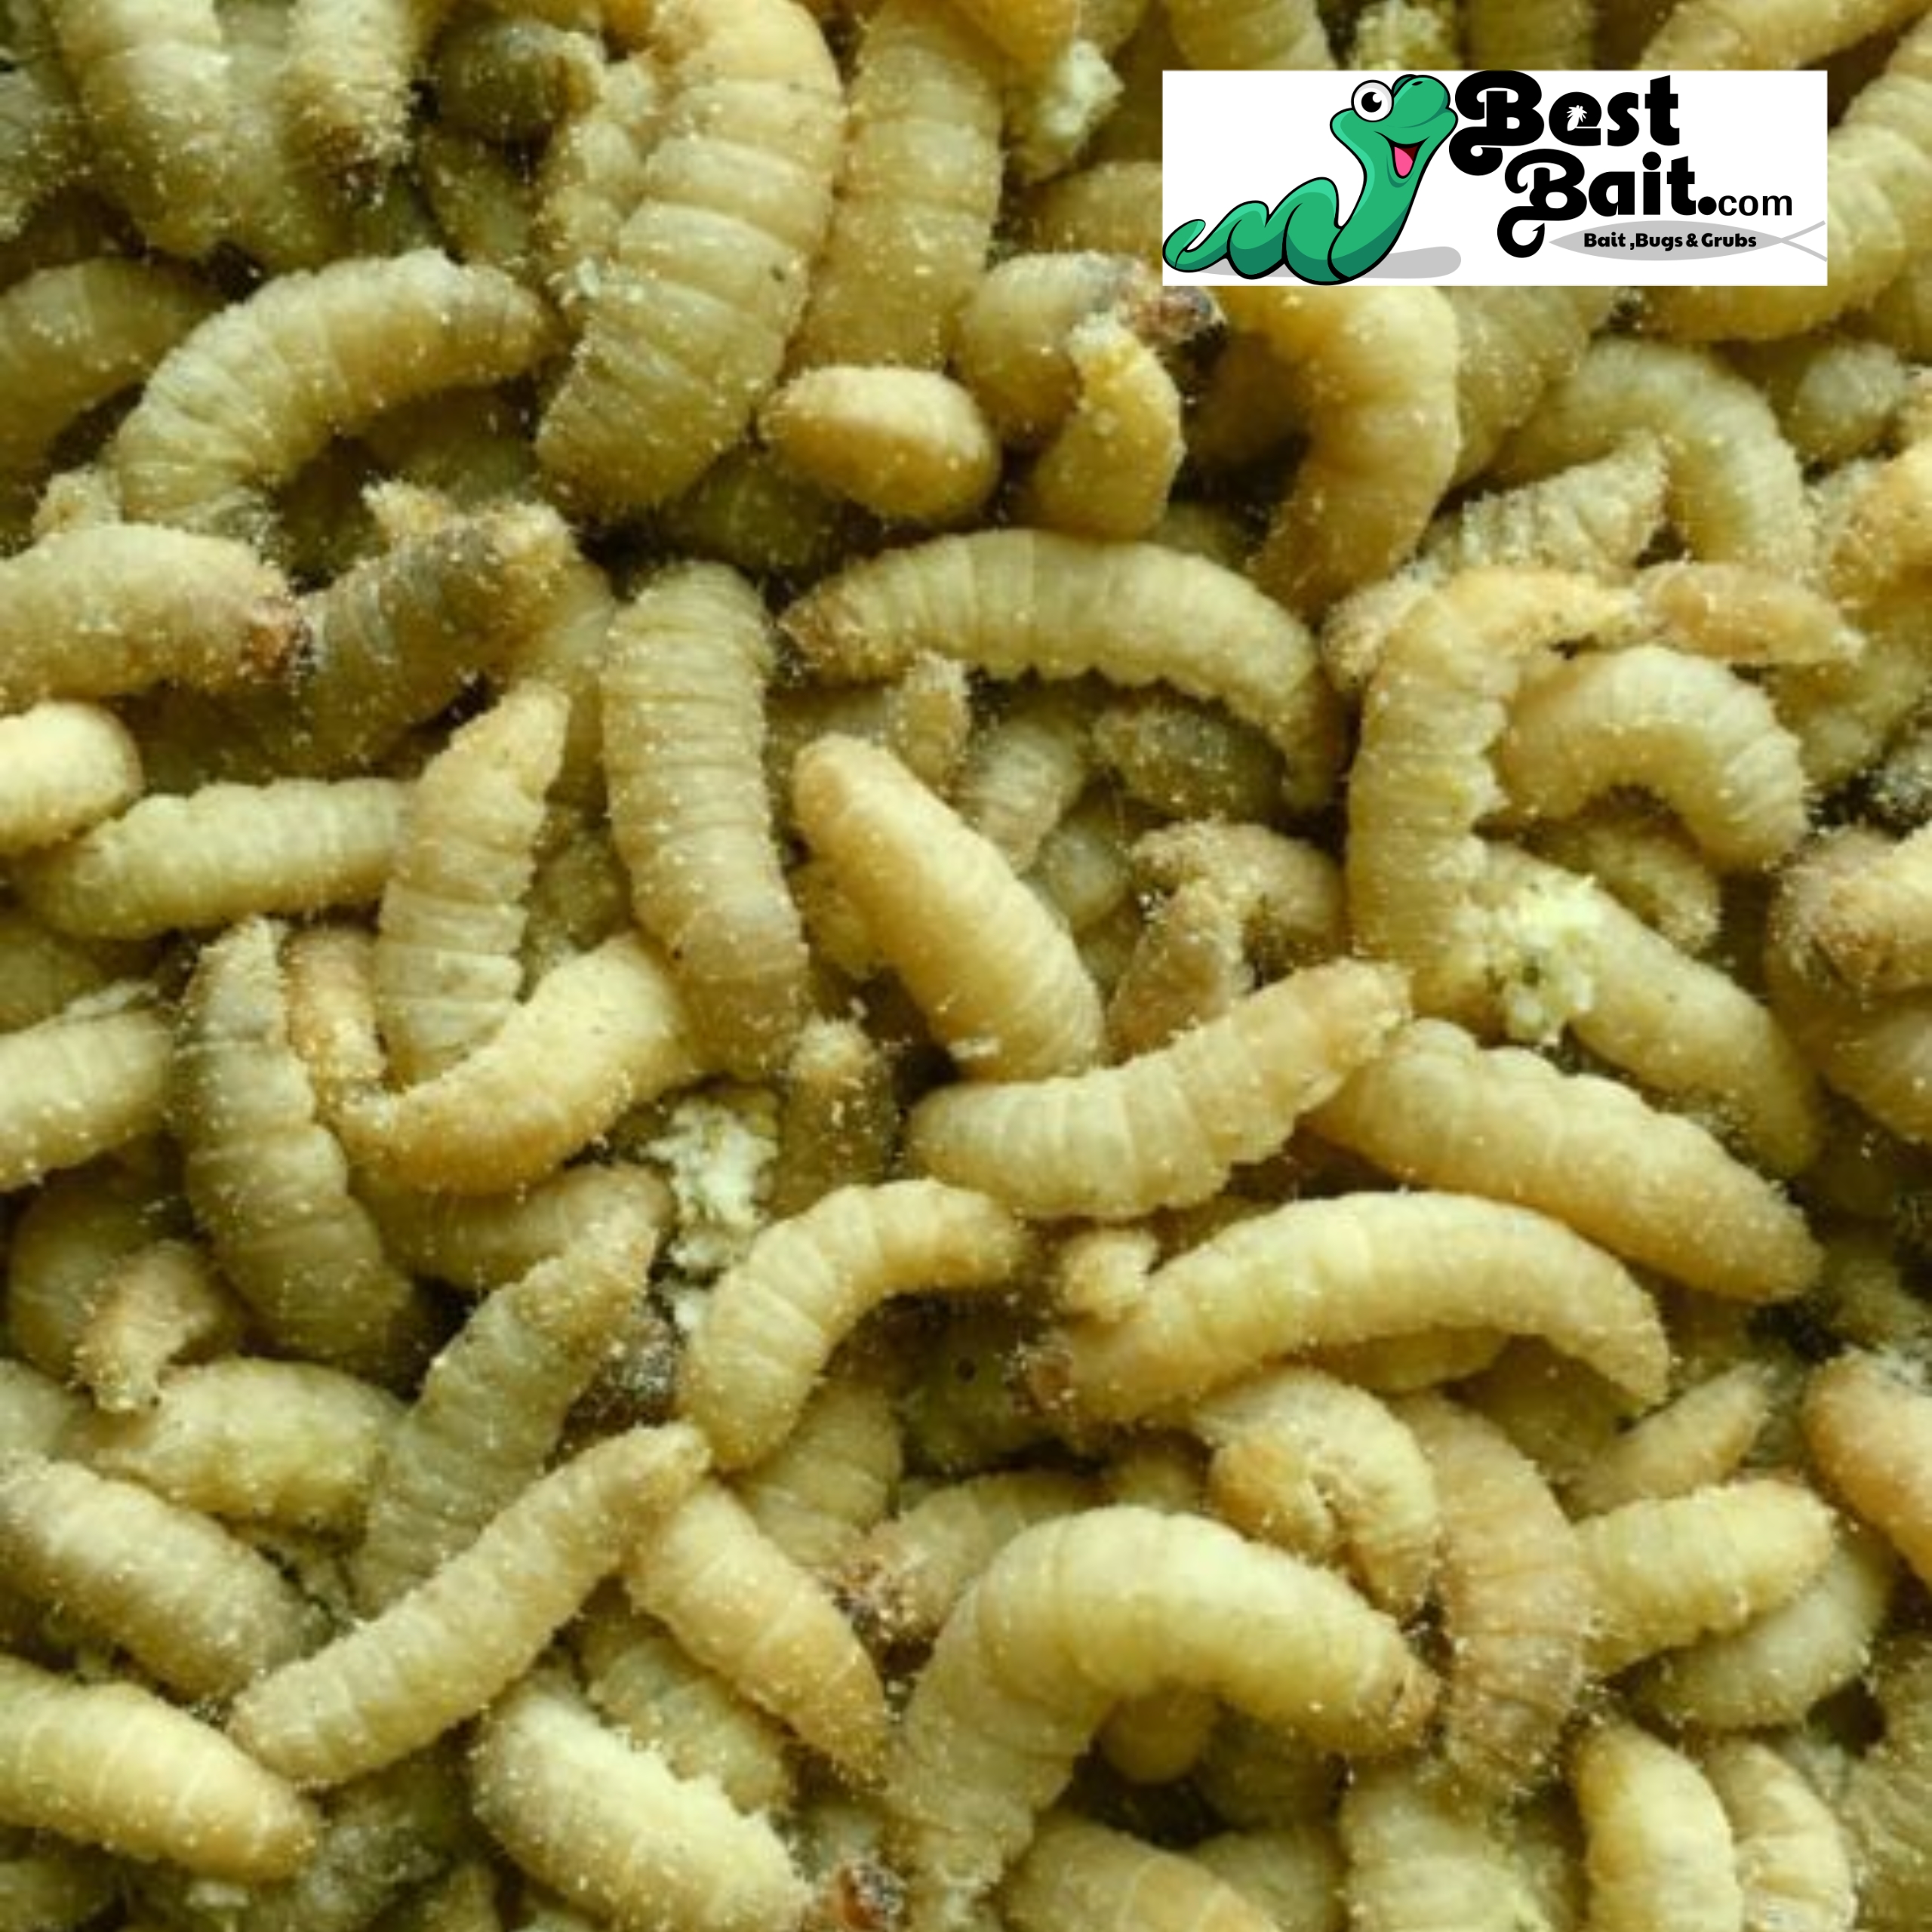 fake maggots bait, fake maggots bait Suppliers and Manufacturers